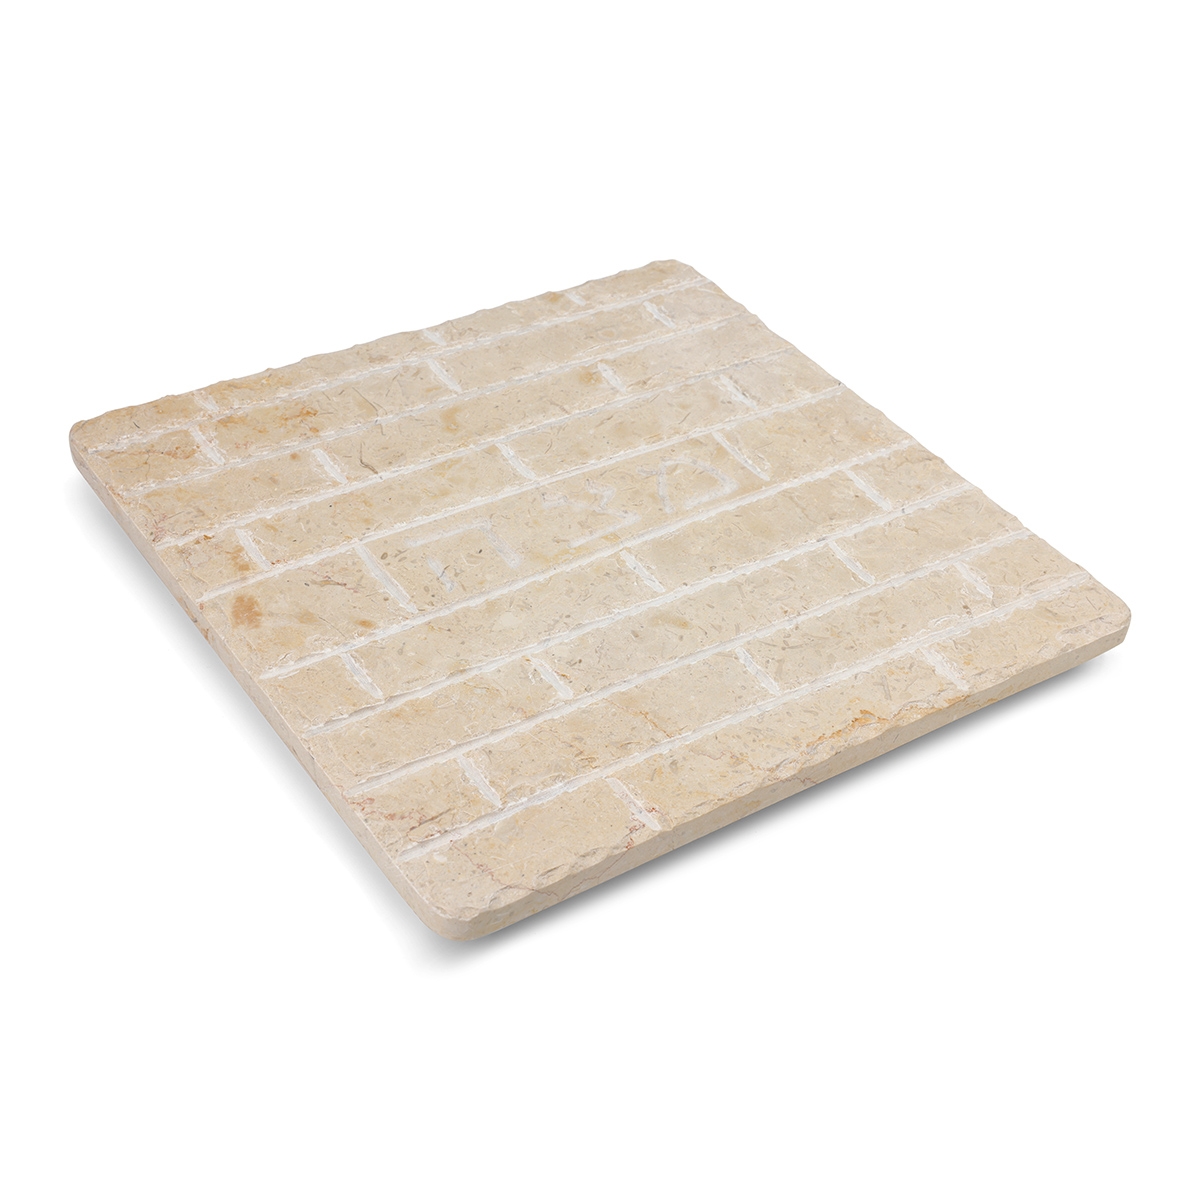 Jerusalem Stone Matzah Plate With Western Wall Design (Choice of Colors) - 1